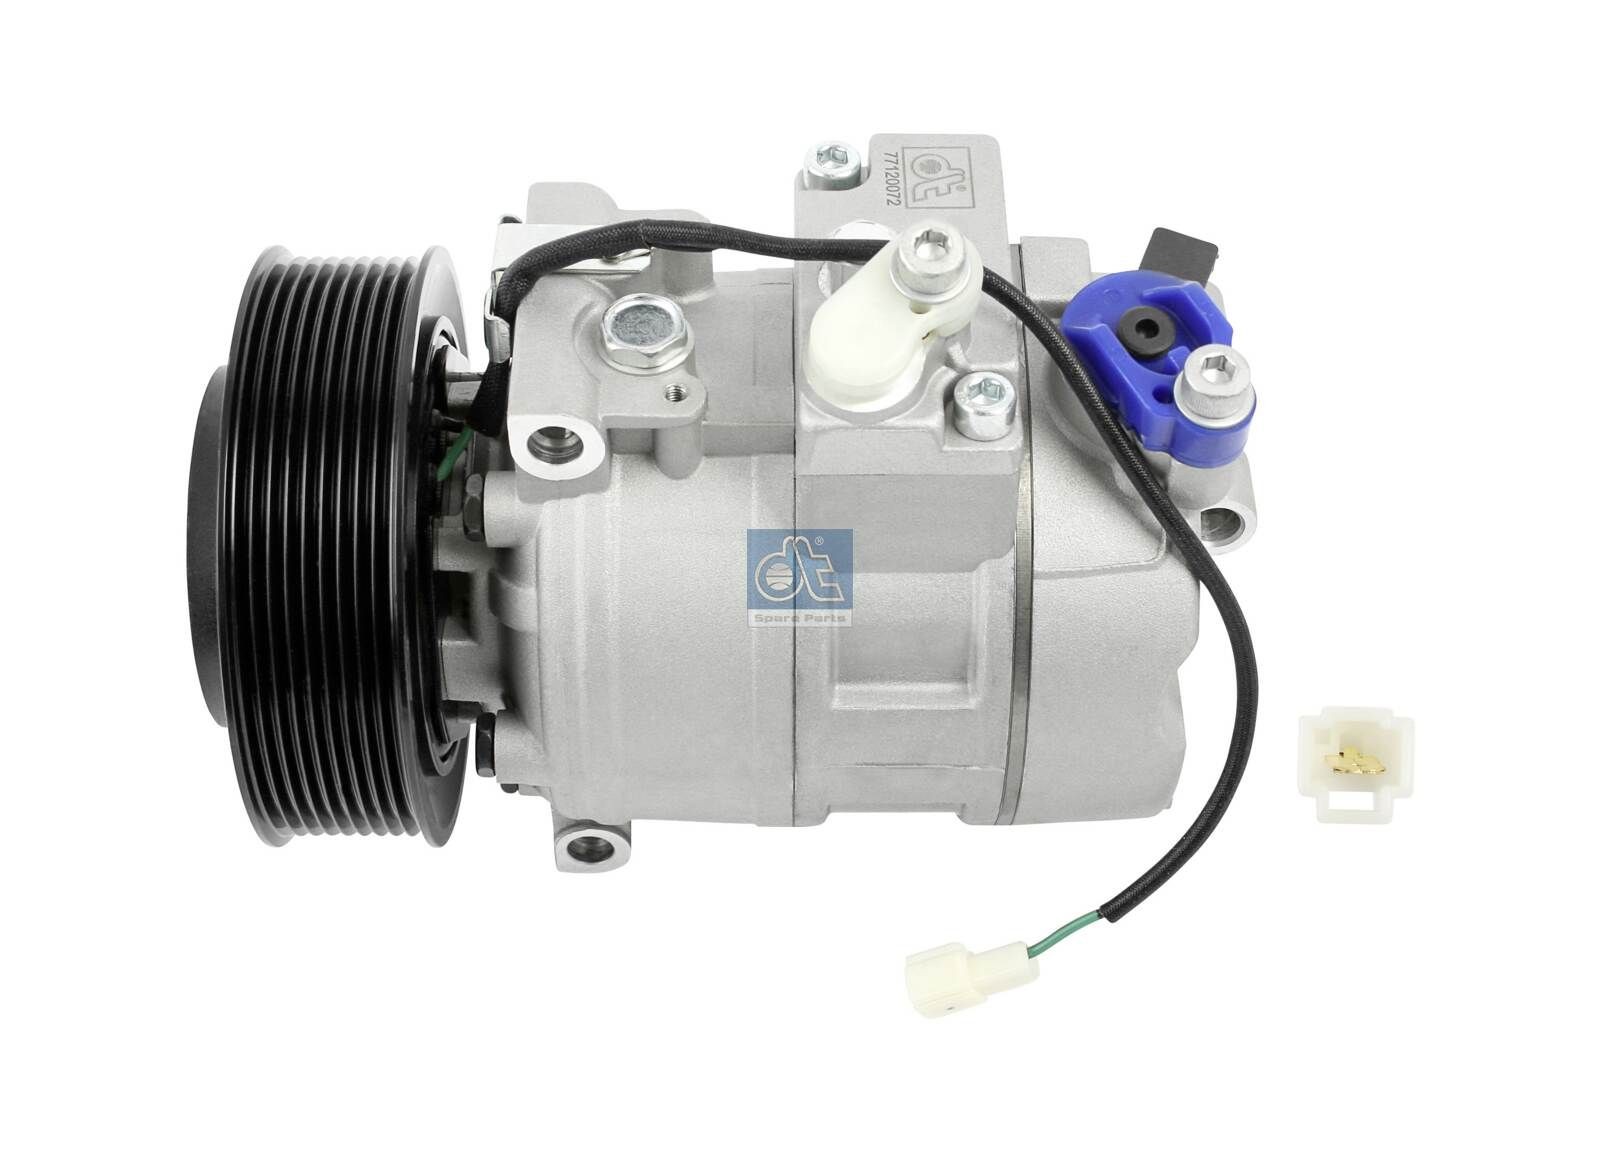 Mercedes E-Class Air conditioning pump 7336841 DT Spare Parts 4.64501 online buy